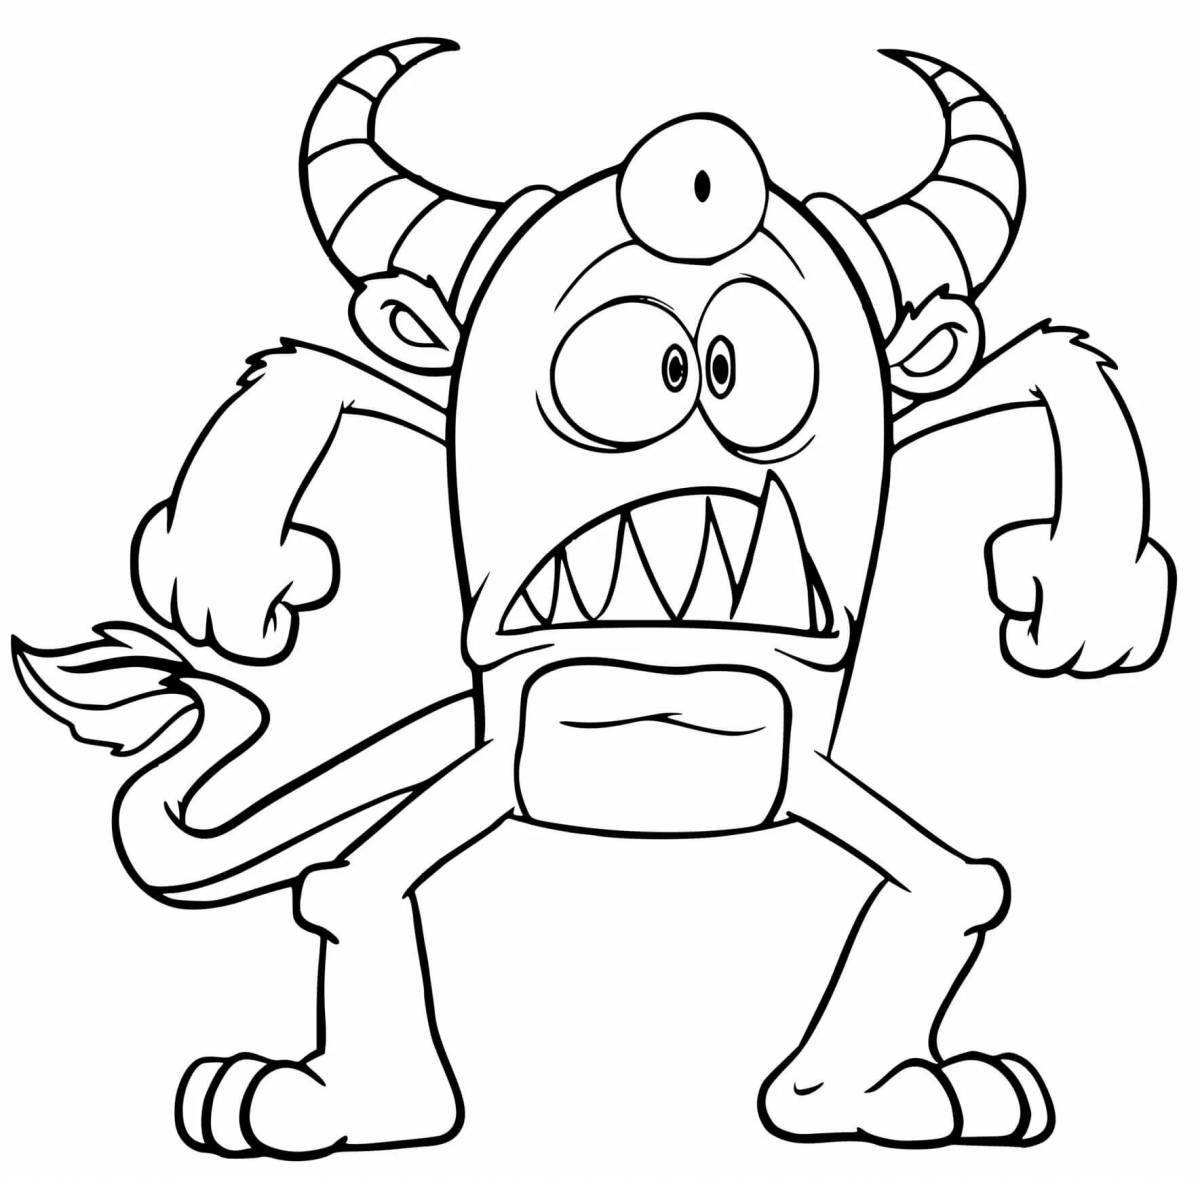 Animated blue monster coloring page